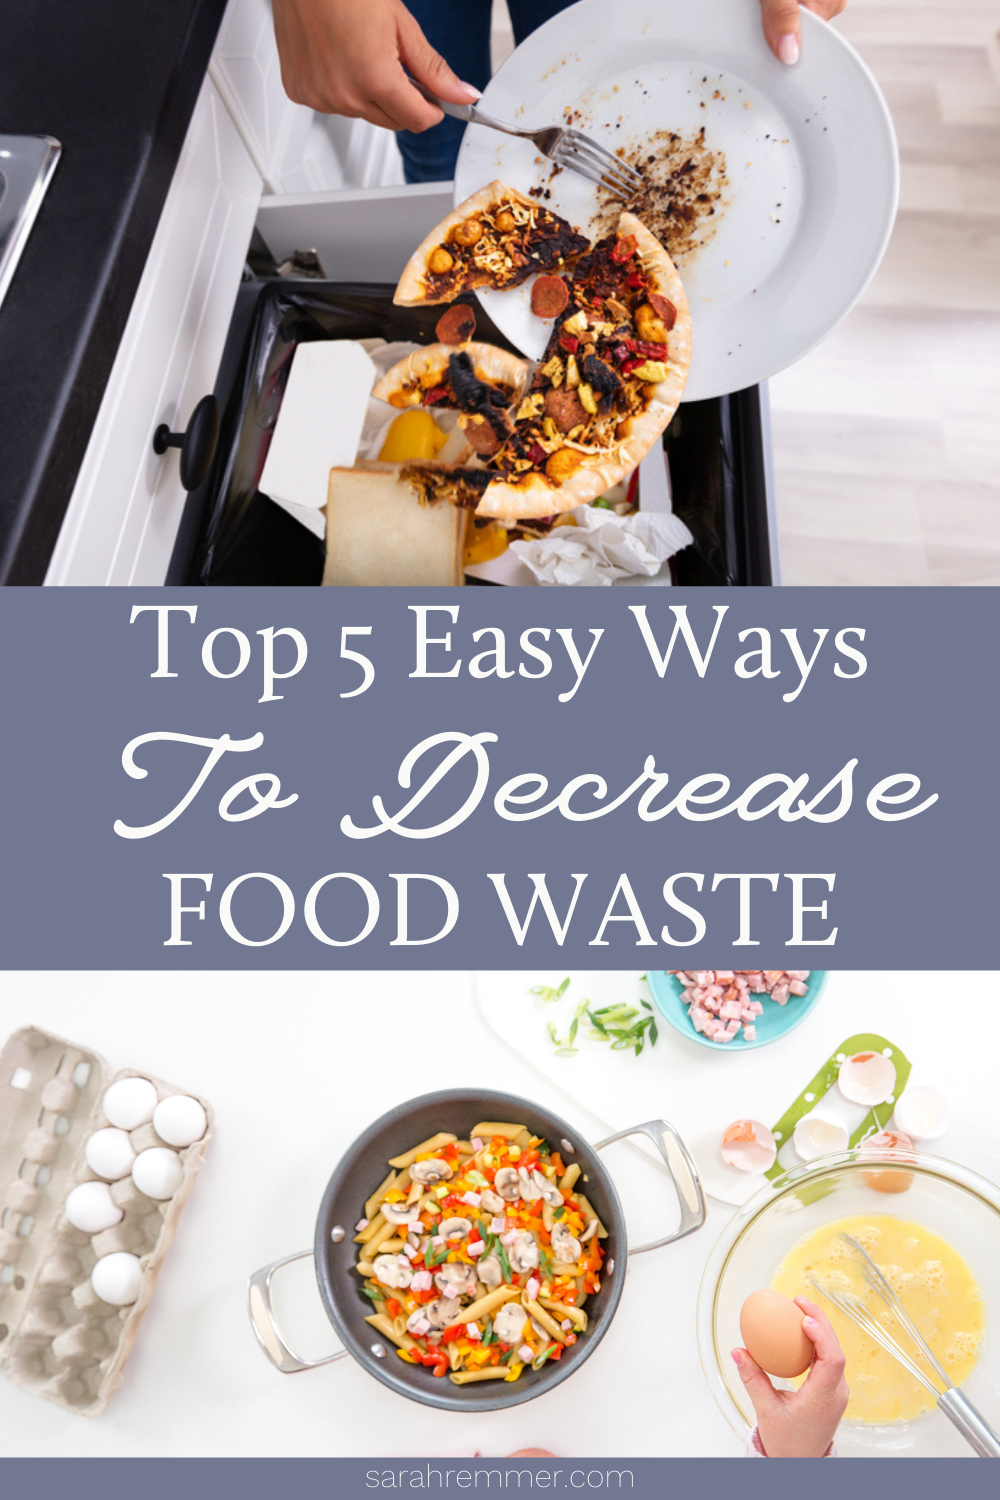 Here are dietitian-approved EASY and DOABLE tips for preventing food waste at home. These tips also save you time and money, and can boost your family’s nutrition too.